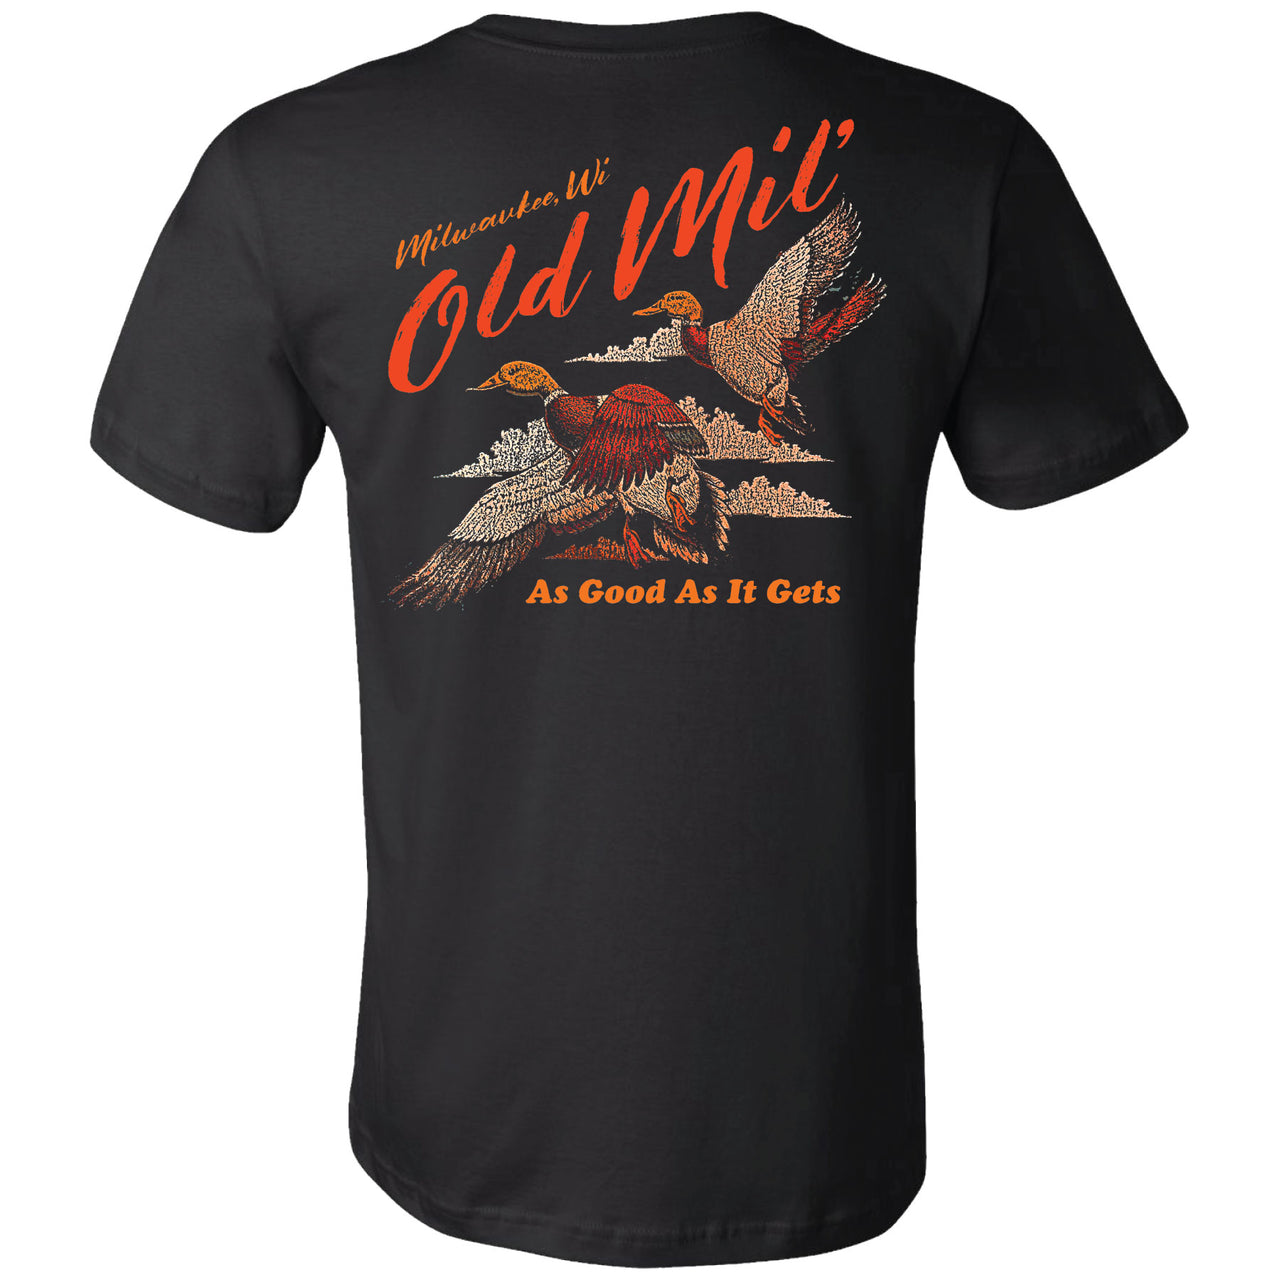 Old Milwaukee - Old Mil, As Good As It Gets, Ducks T-Shirt